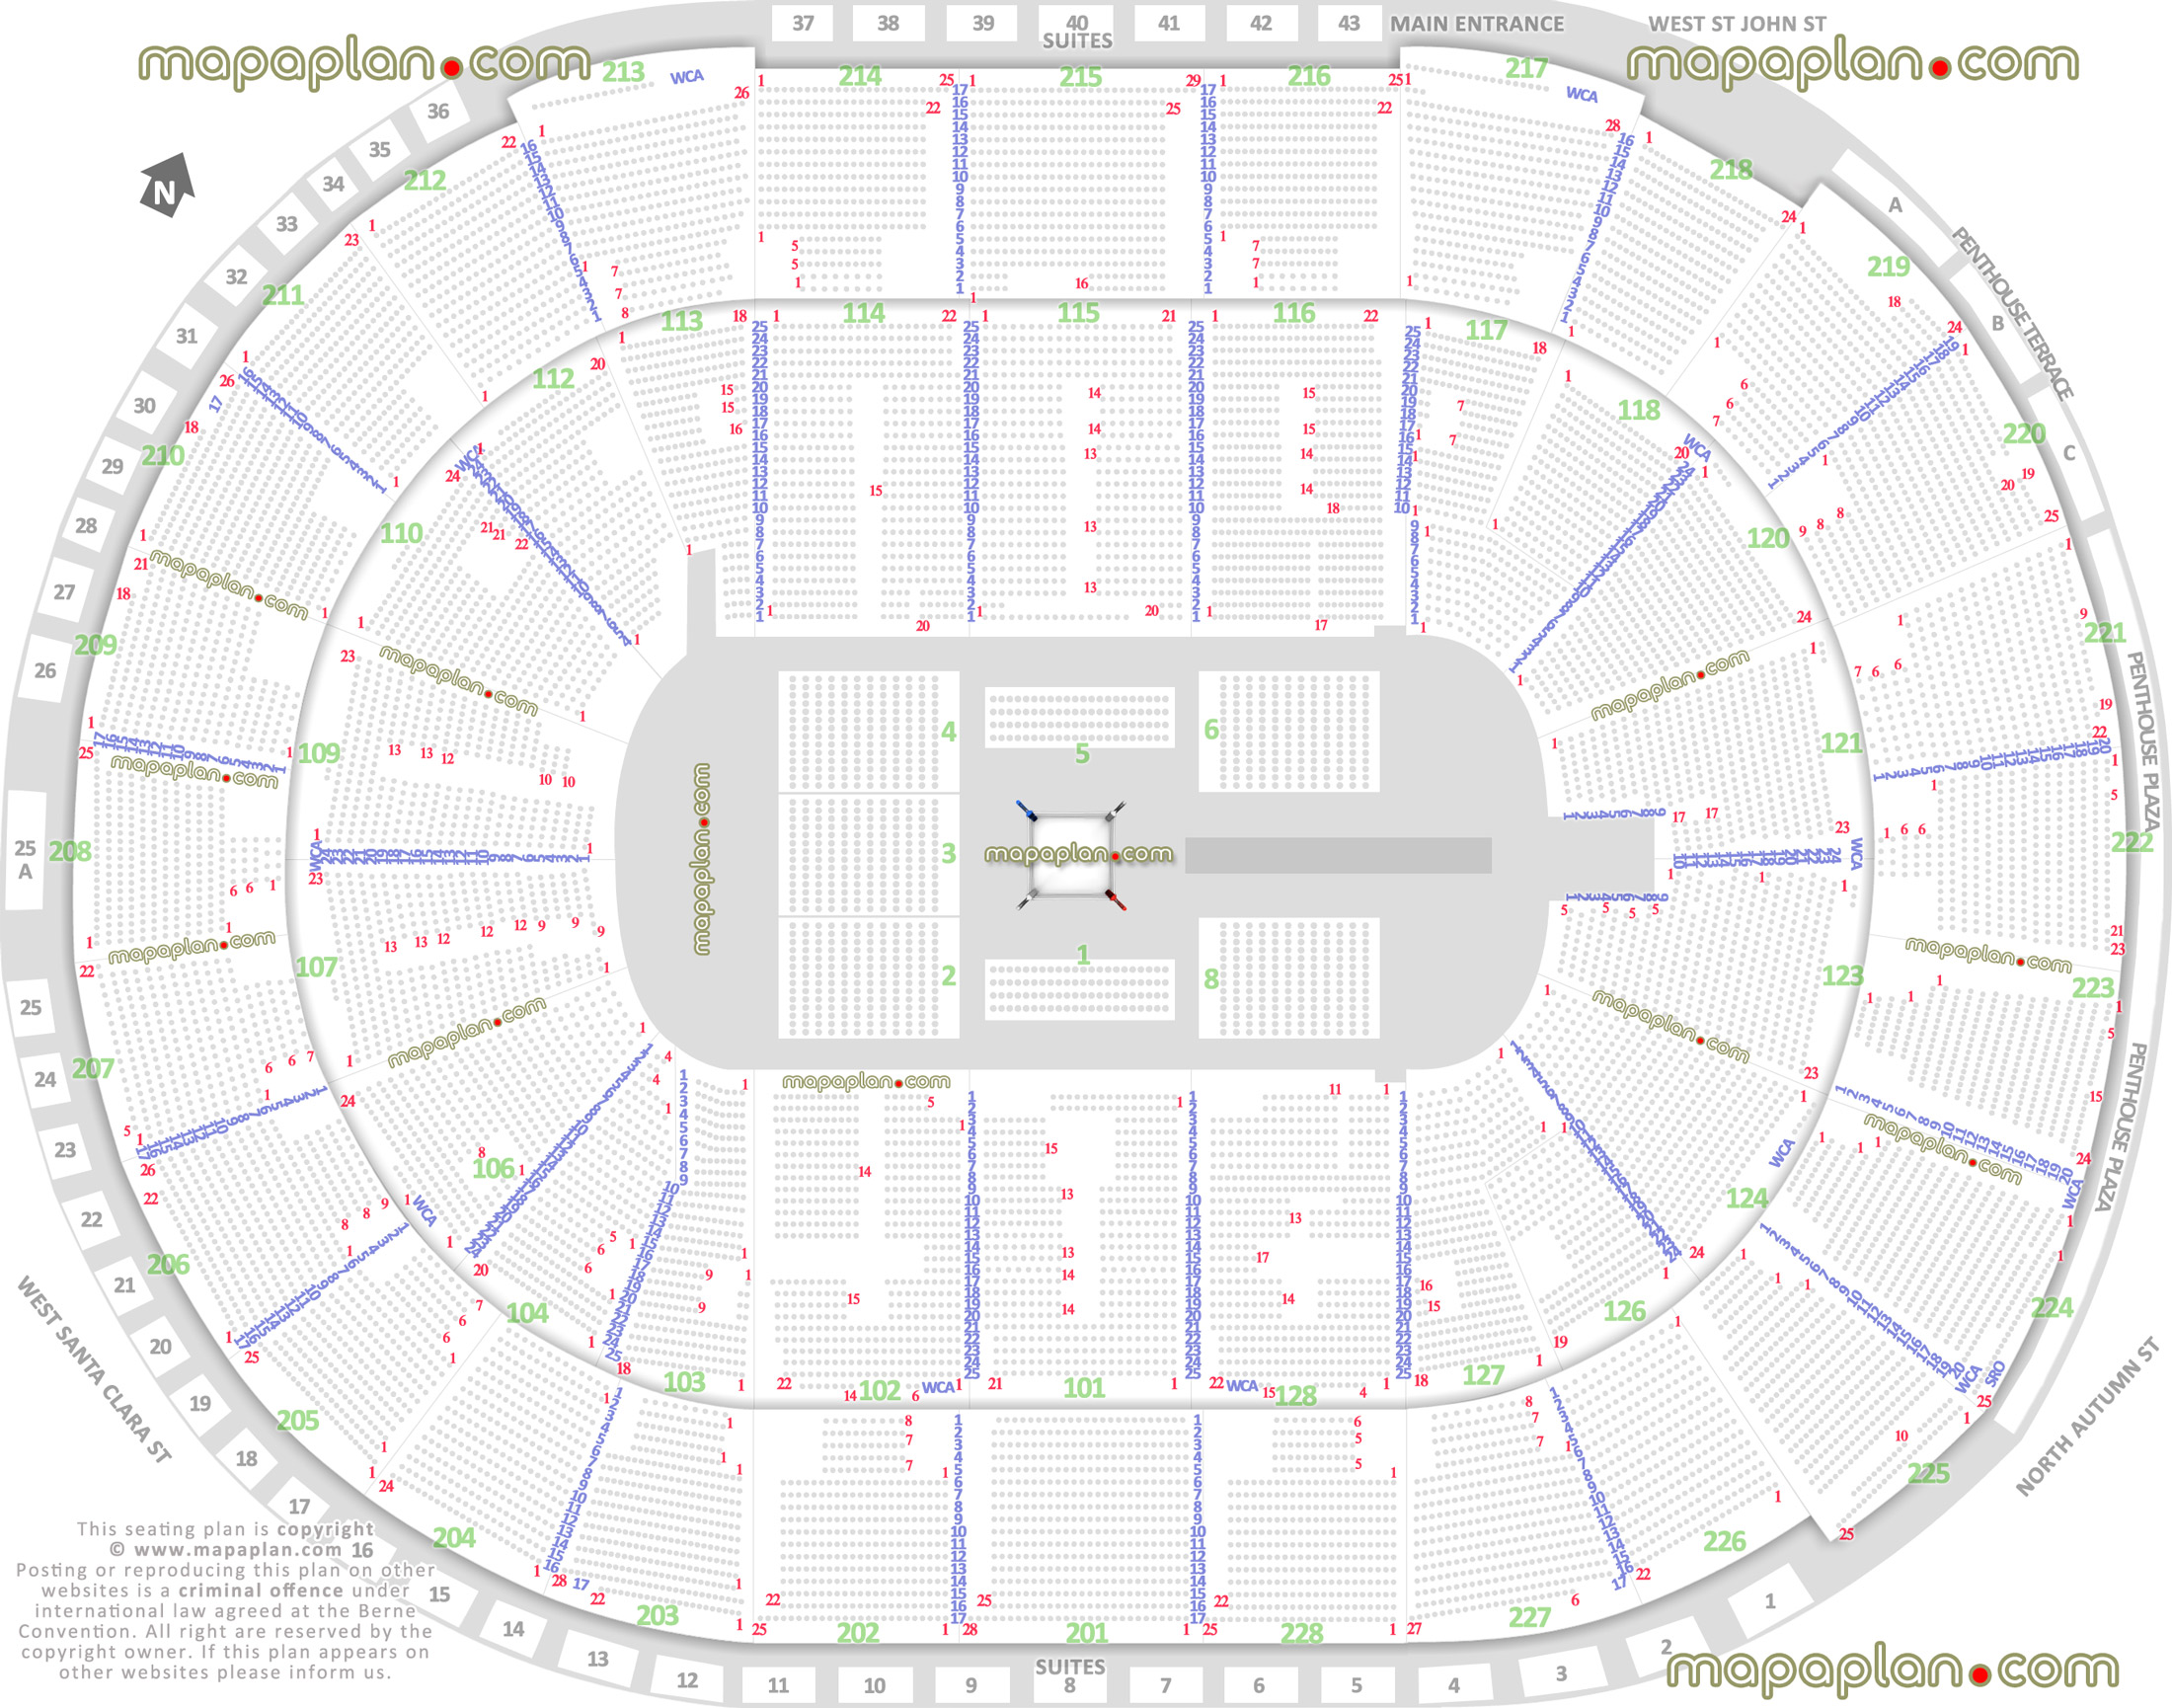 wwe wrestling boxing match events map row 360 round ring floor configuration rows sections 101 102 103 104 106 107 109 110 112 113 114 115 116 117 118 120 121 123 124 126 127 128 San Jose SAP Center seating chart